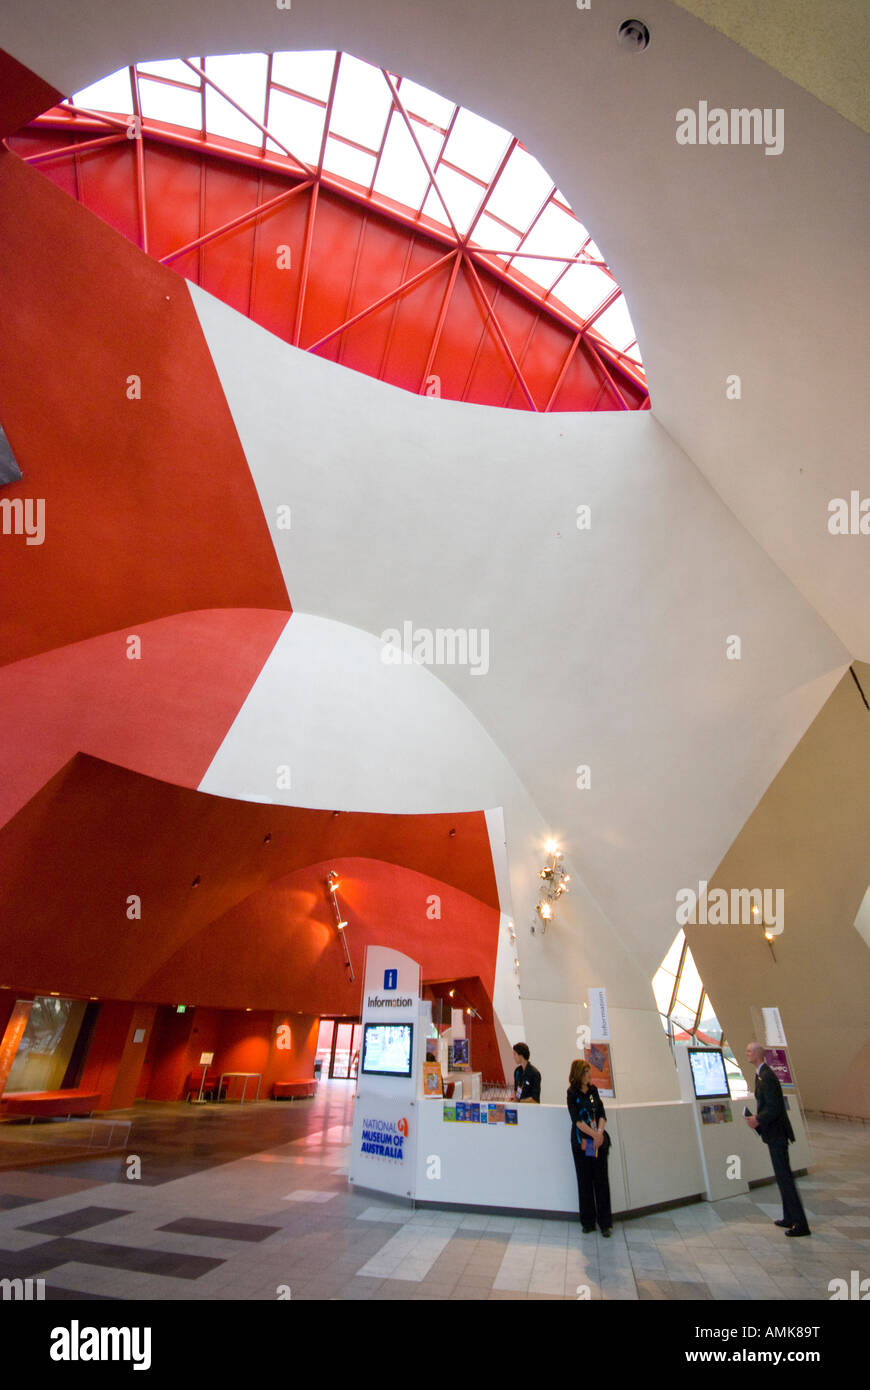 Innenraum des National Museum of Australia in Canberra Stockfoto